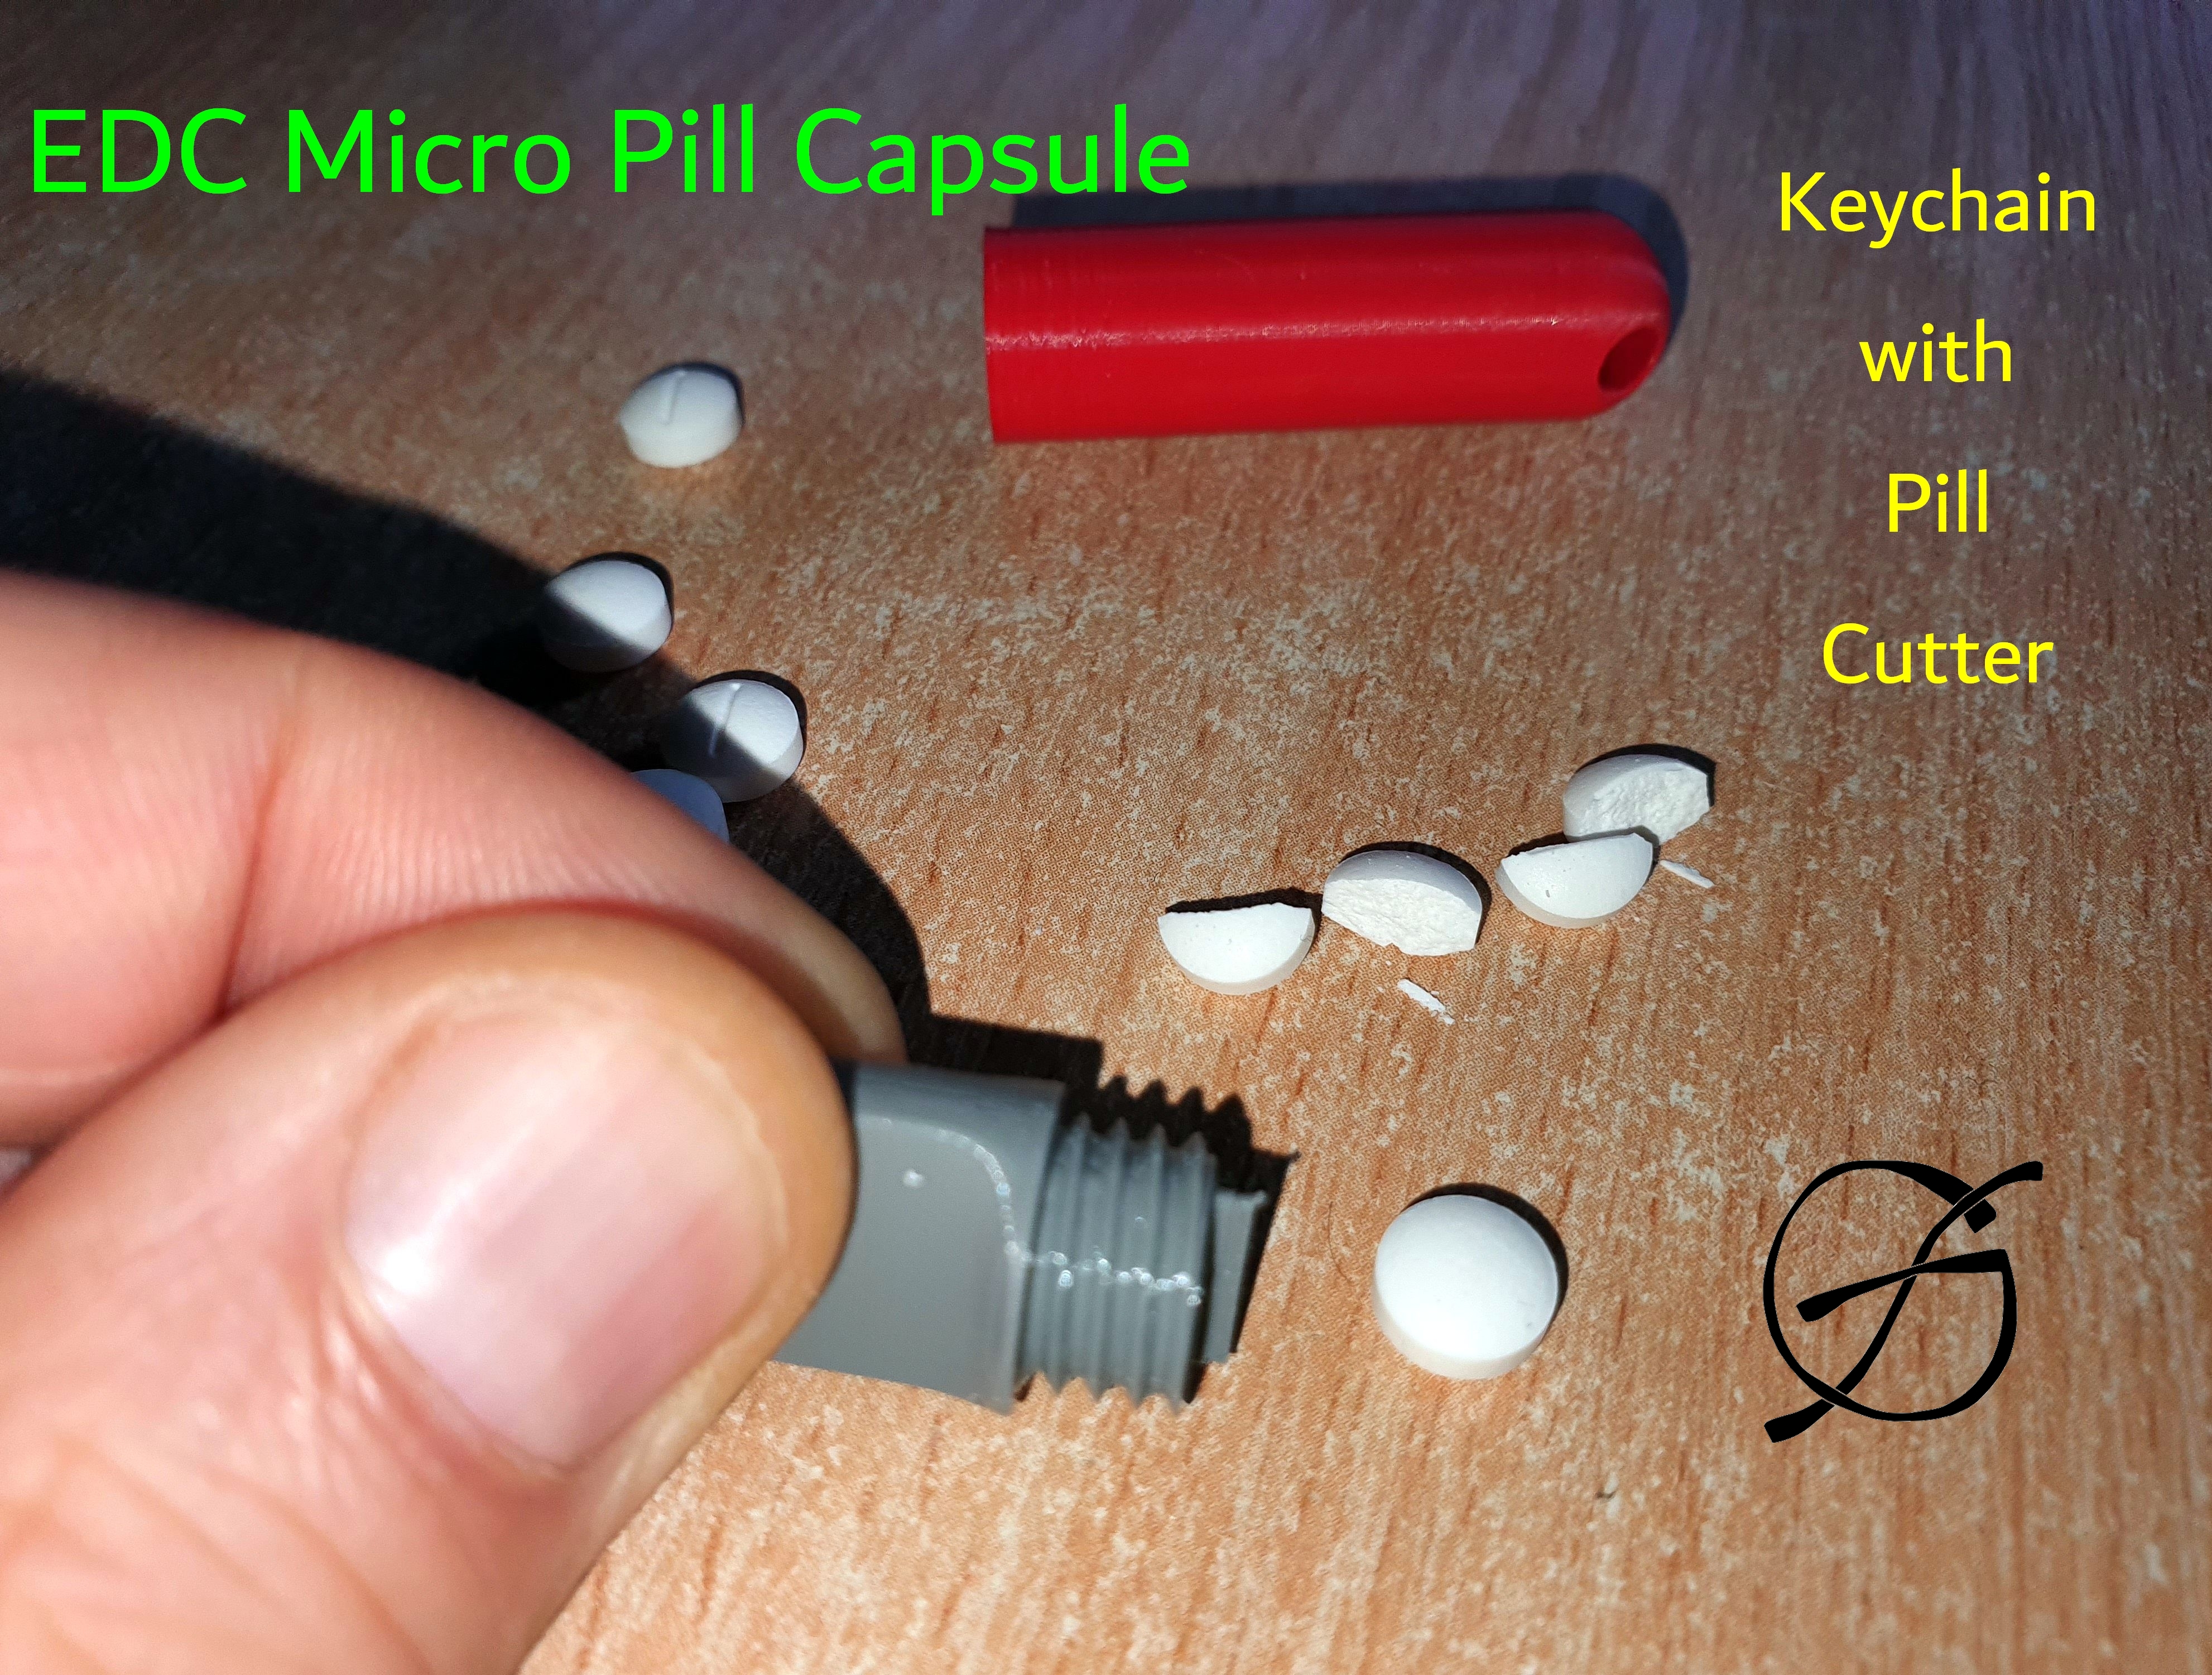 EDC Micro Pill Capsule - Keychain witch Pill Cutter